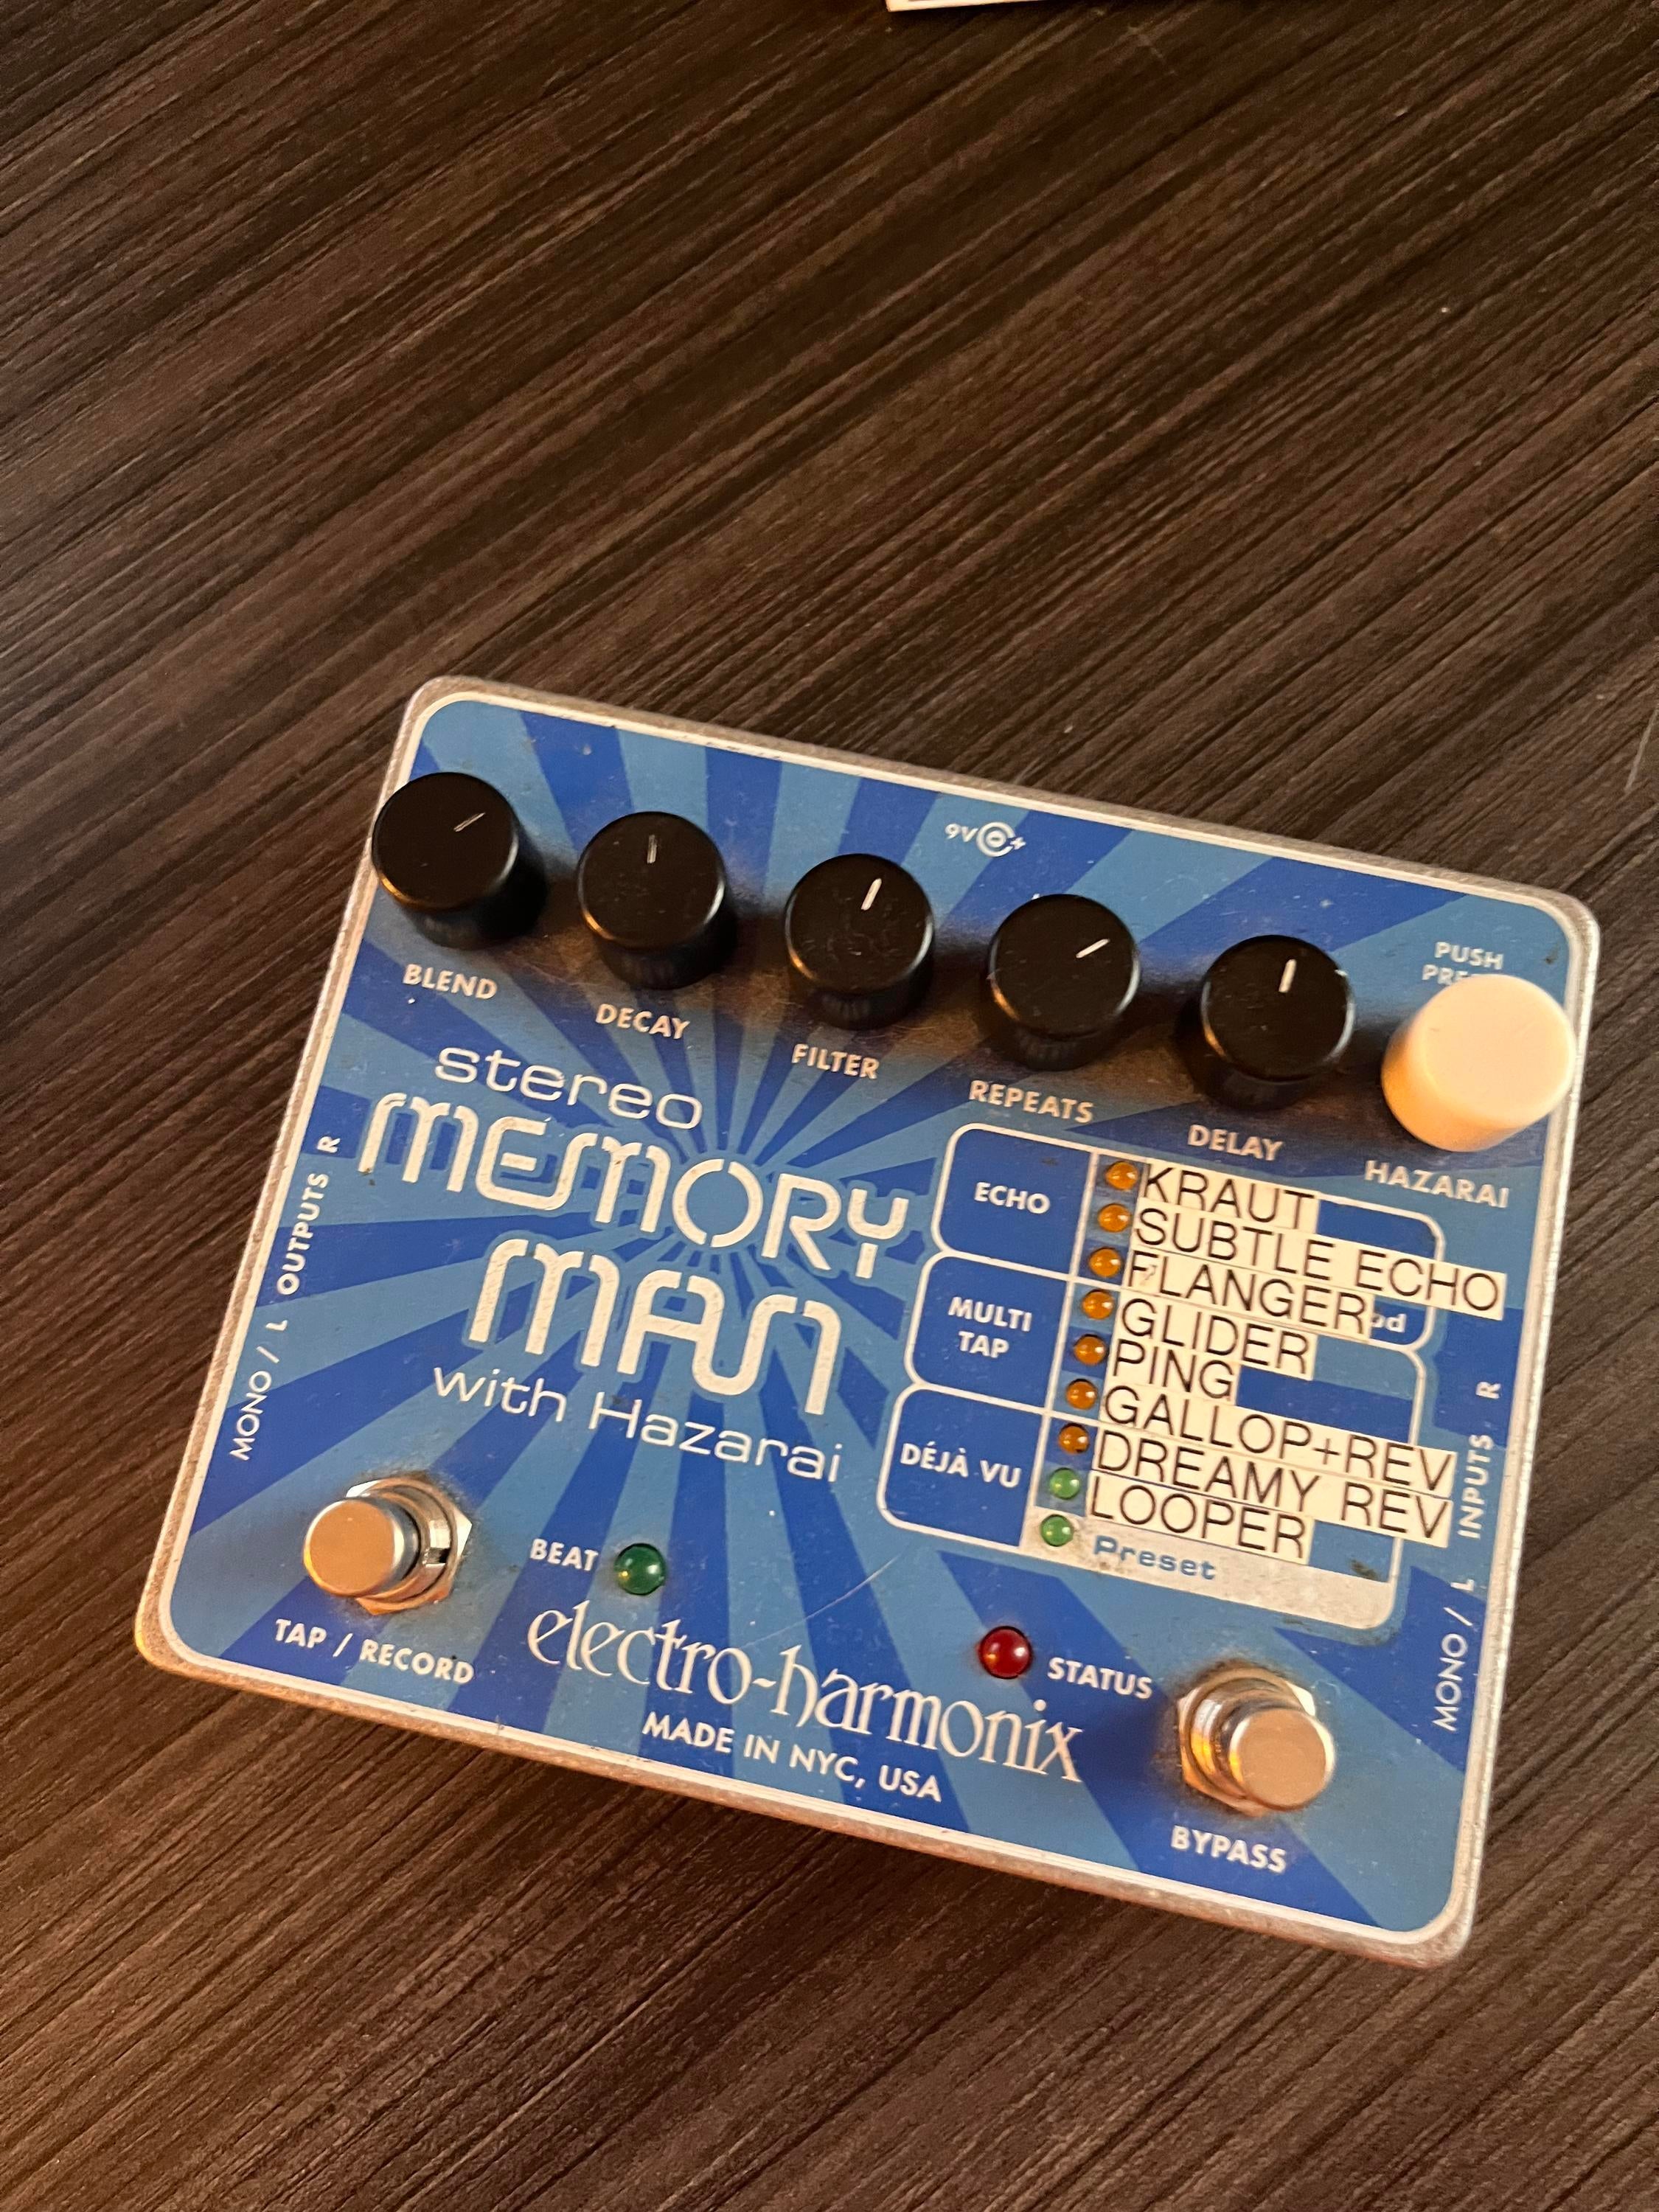 Used Electro-Harmonix Stereo Memory Man with - Sweetwater's Gear